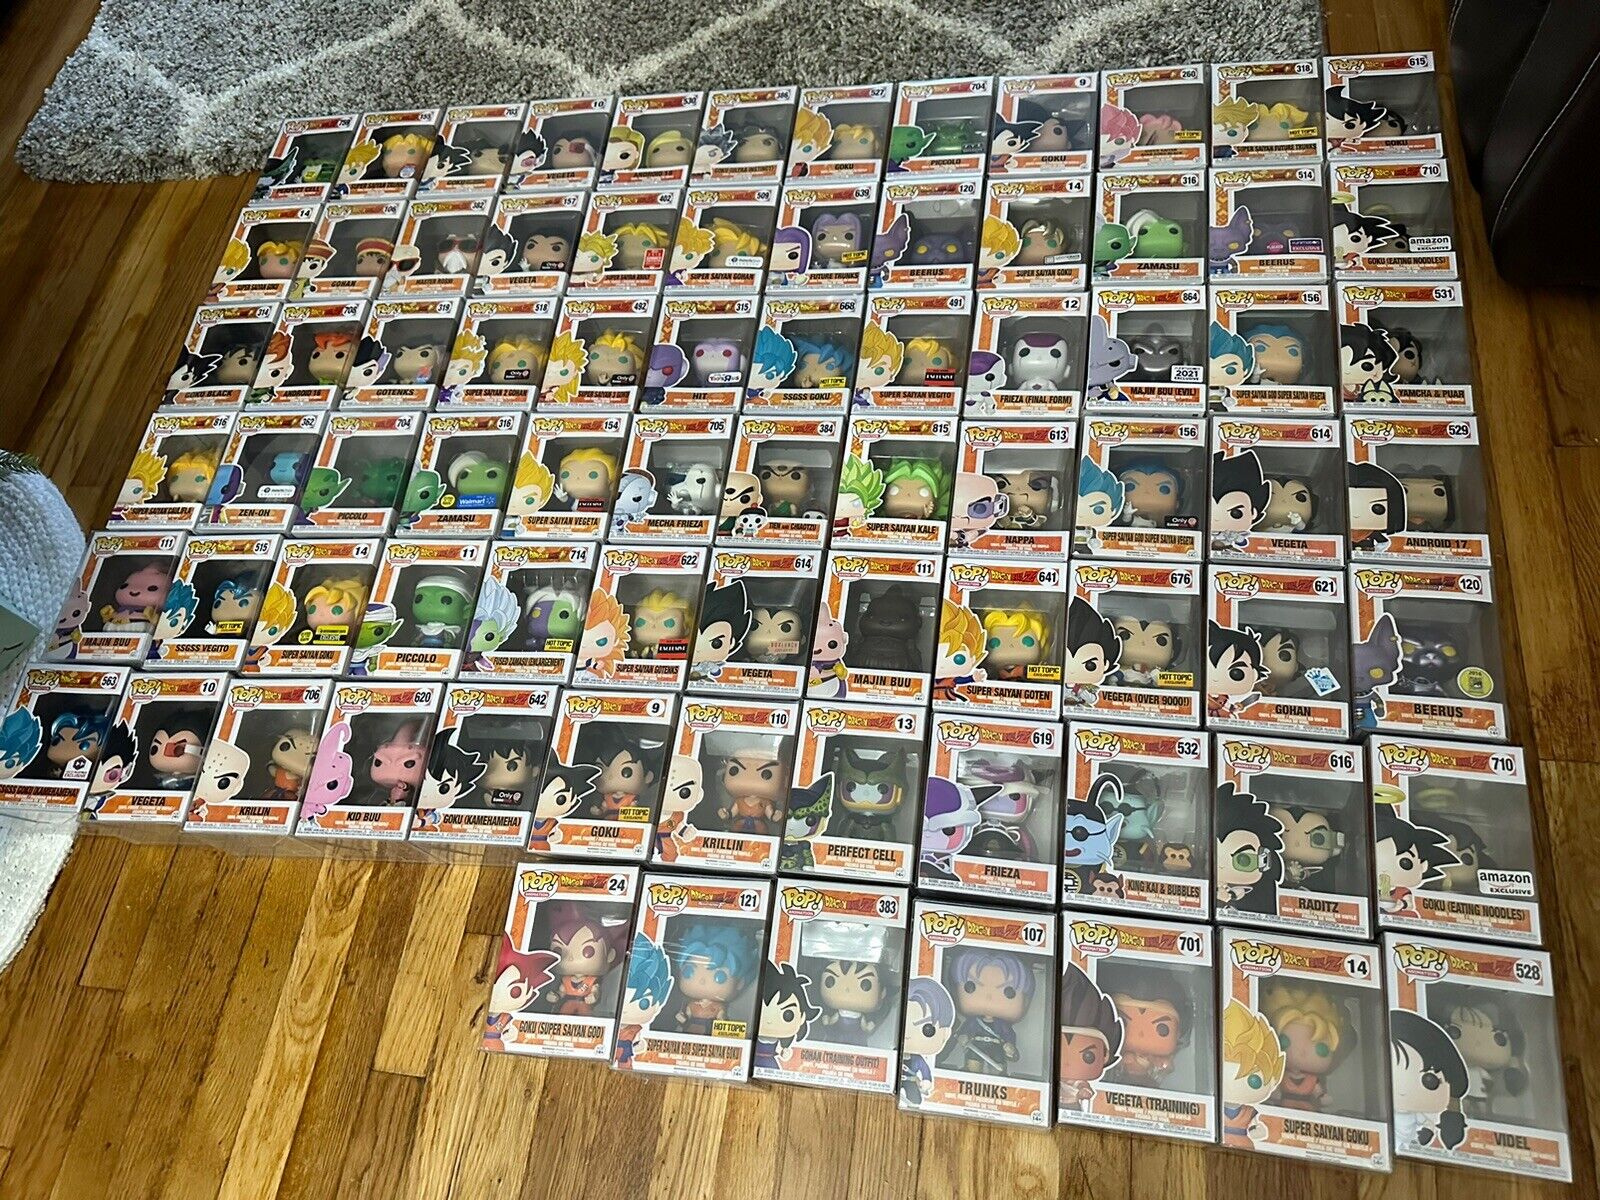 Dragonball Z Super Funko Pop Lot of 79 Vaulted Rare NYCC SDCC NM Condition